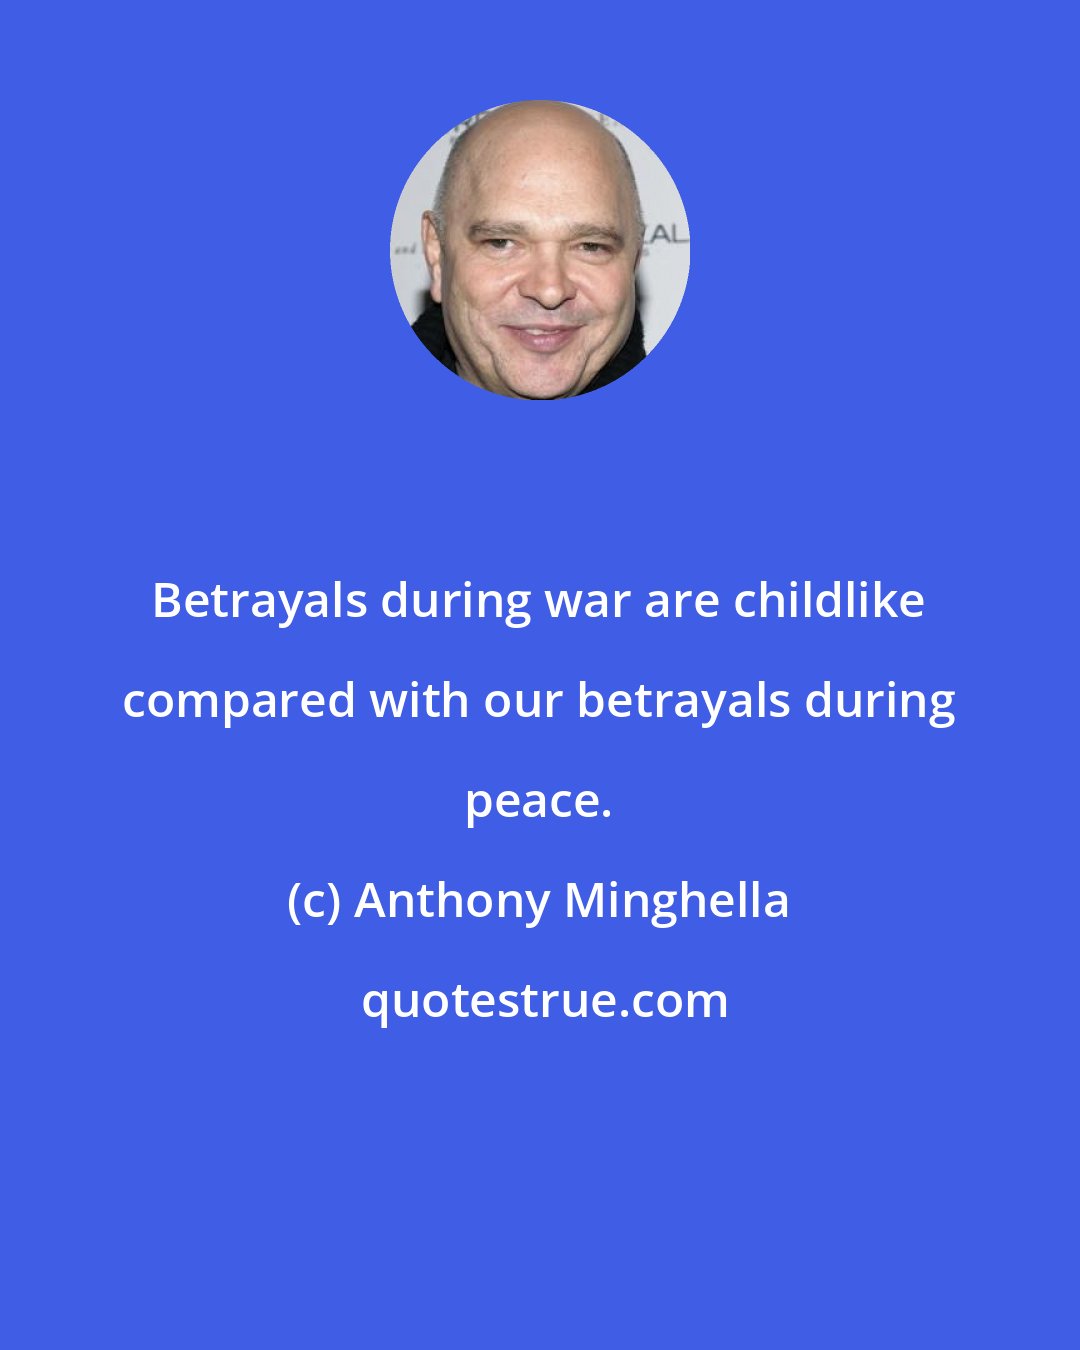 Anthony Minghella: Betrayals during war are childlike compared with our betrayals during peace.